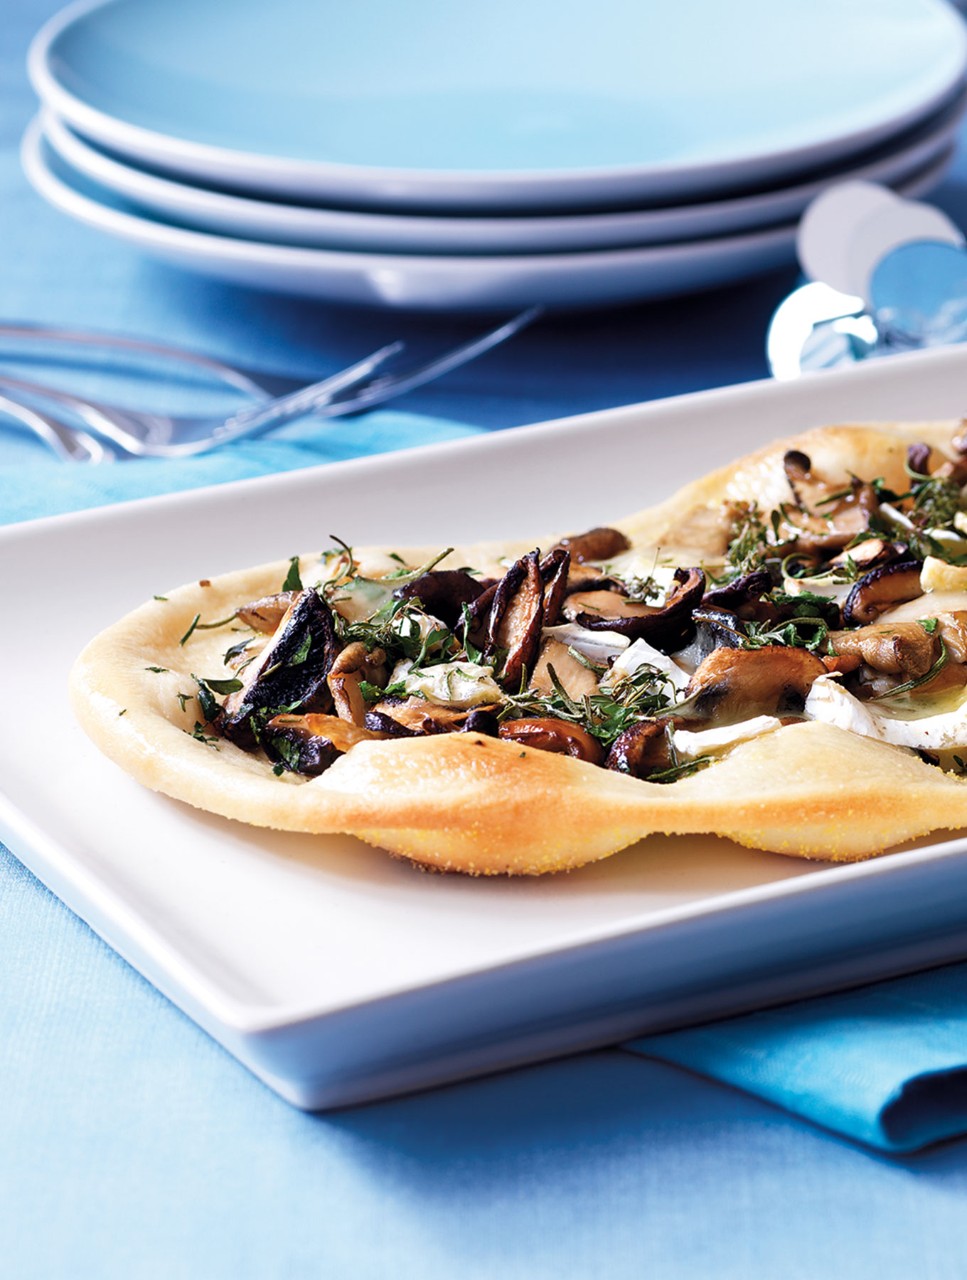 White Pizzas With Brie, Wild Mushrooms and Herbs